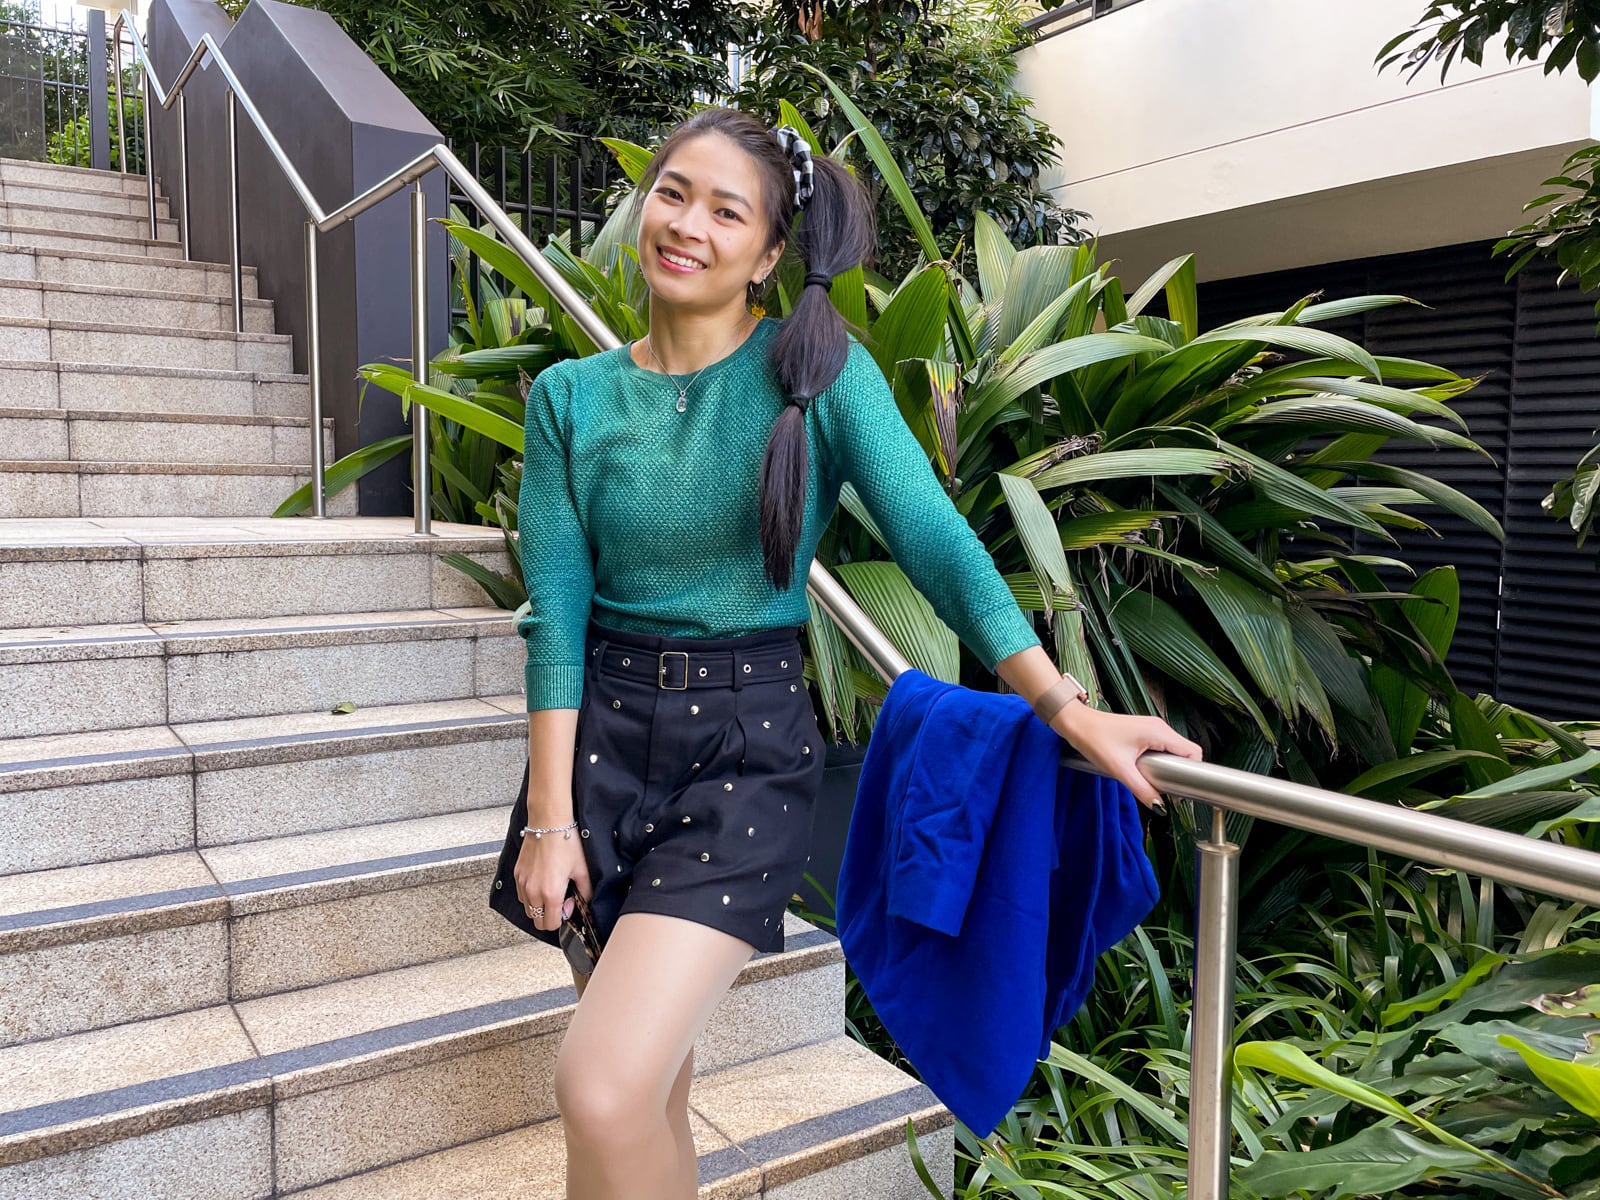 An Asian woman with dark hair tied in a ponytail with tied sections, standing on a set of concrete stairs. She is wearing a green top with three-quarter sleeves, and black shorts, and has her hand on a metal railing.